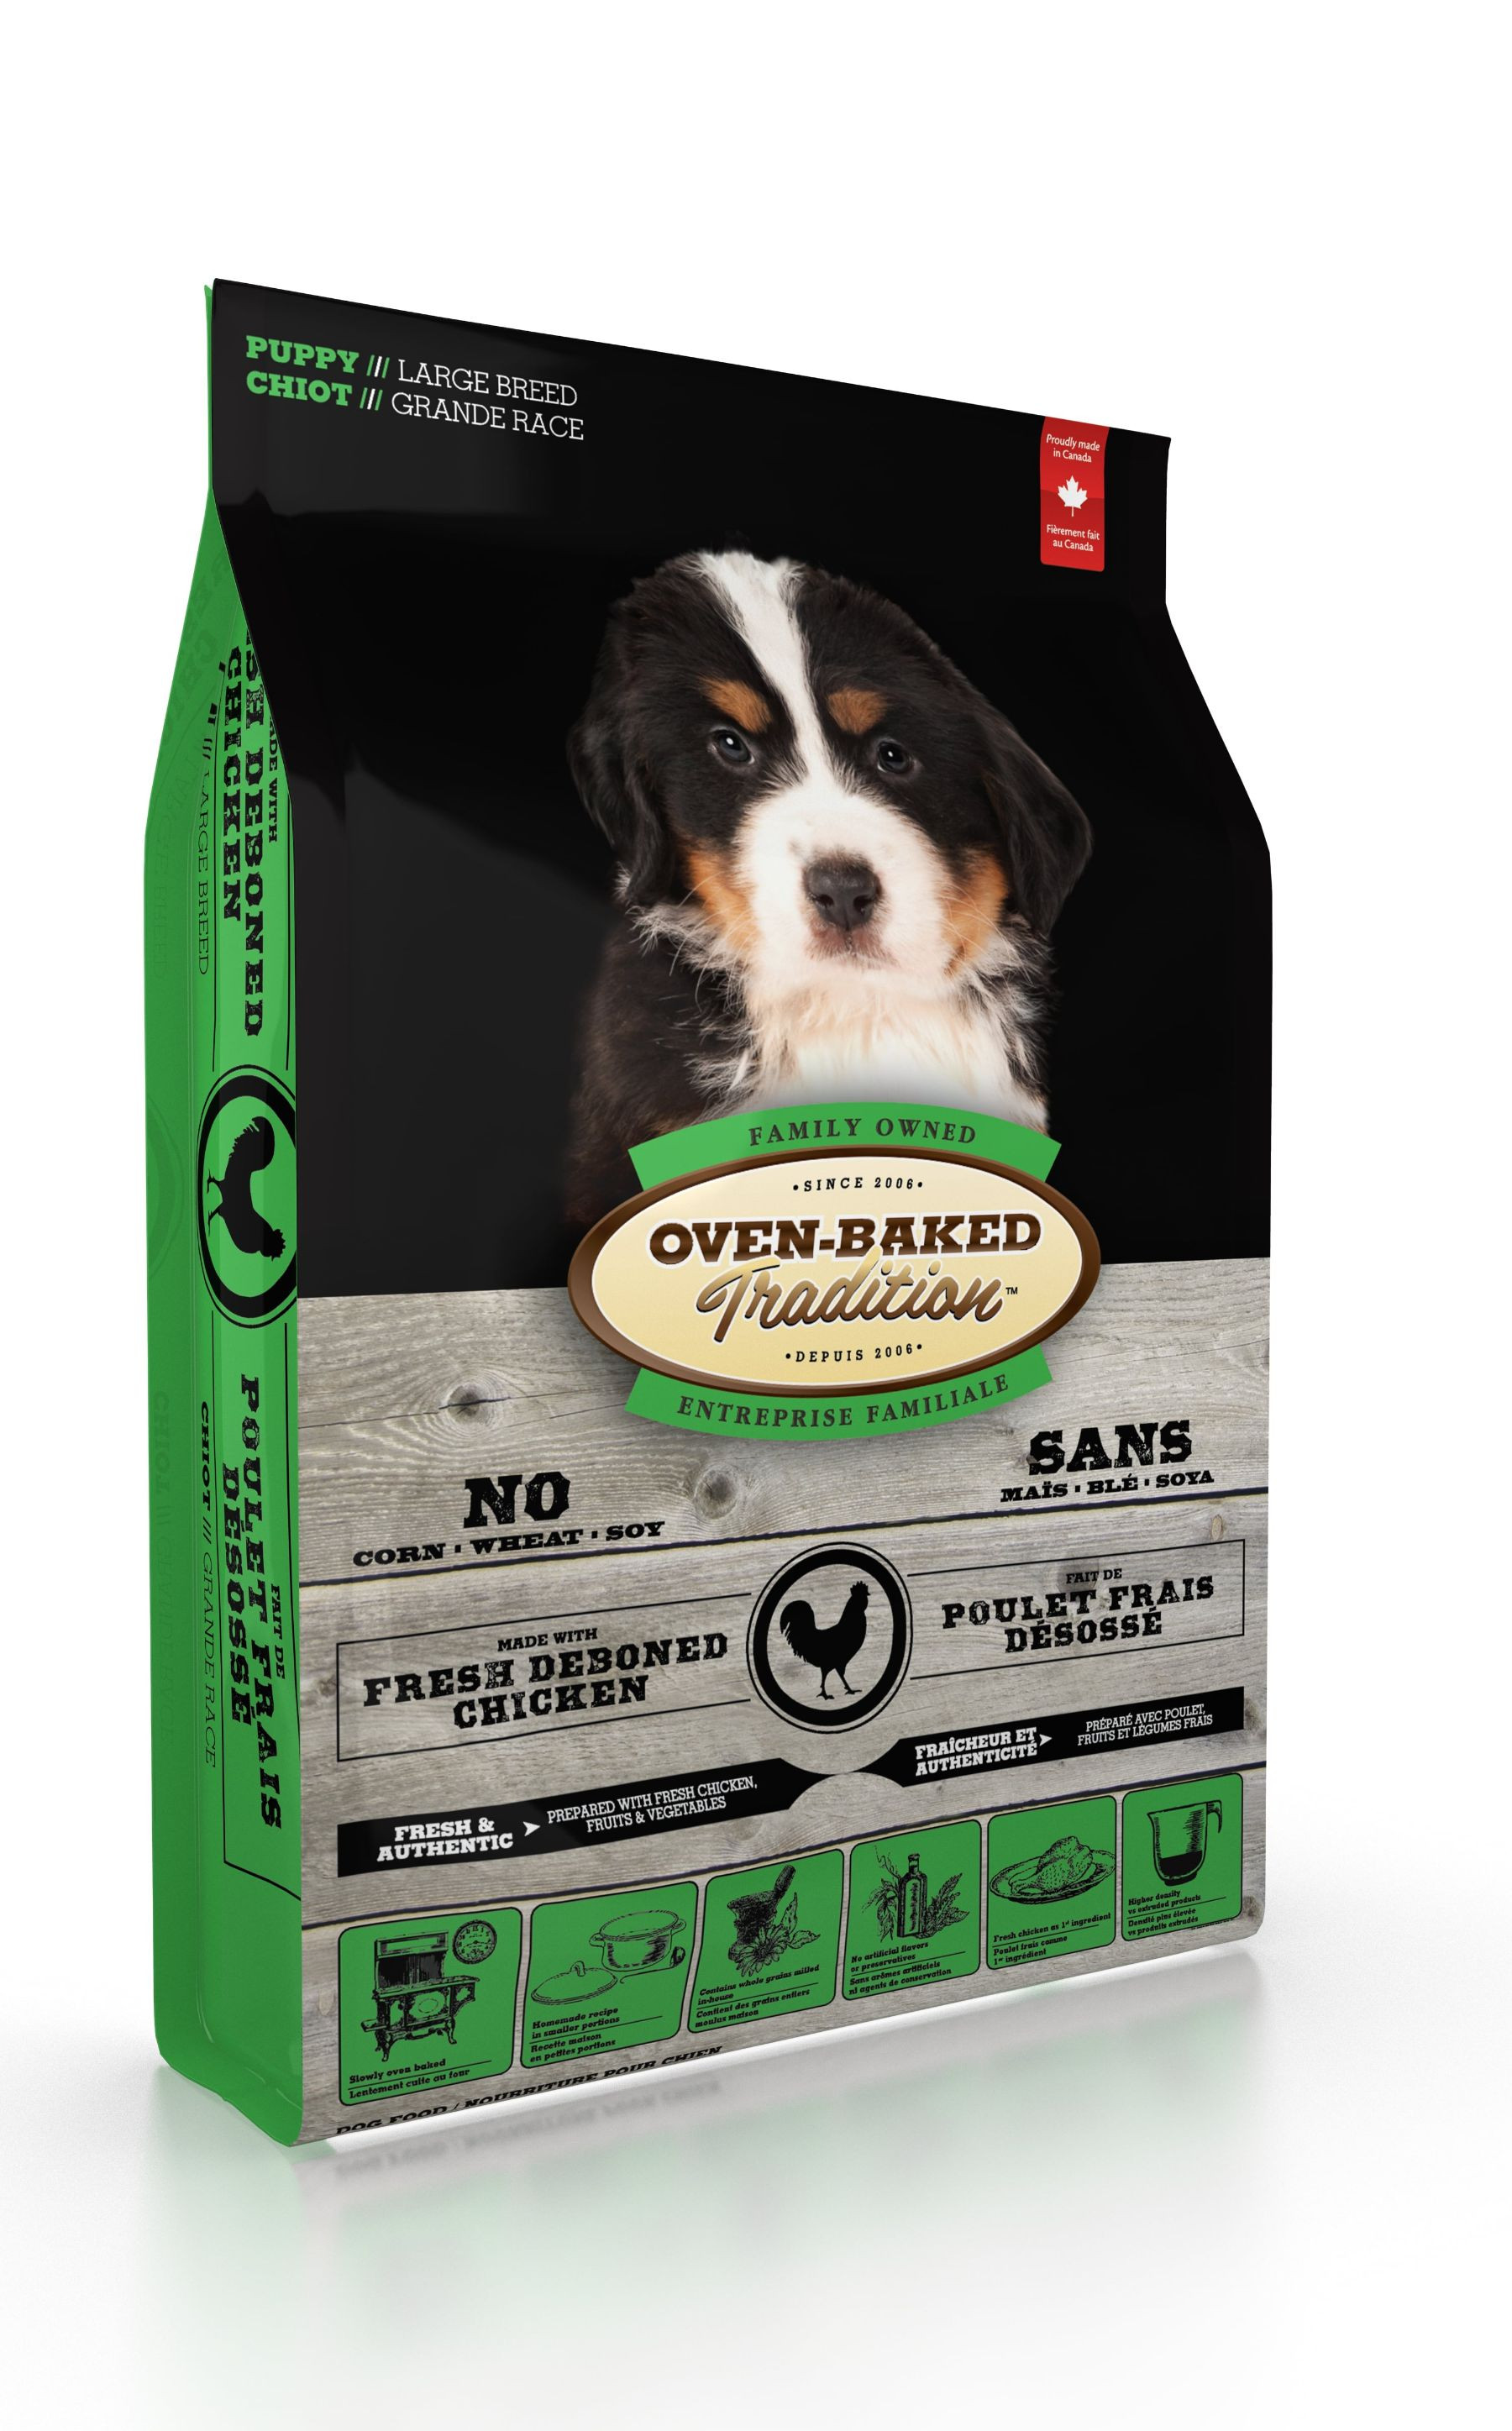 Oven-Baked Tradition Puppy Large Breed Chicken hondenvoer